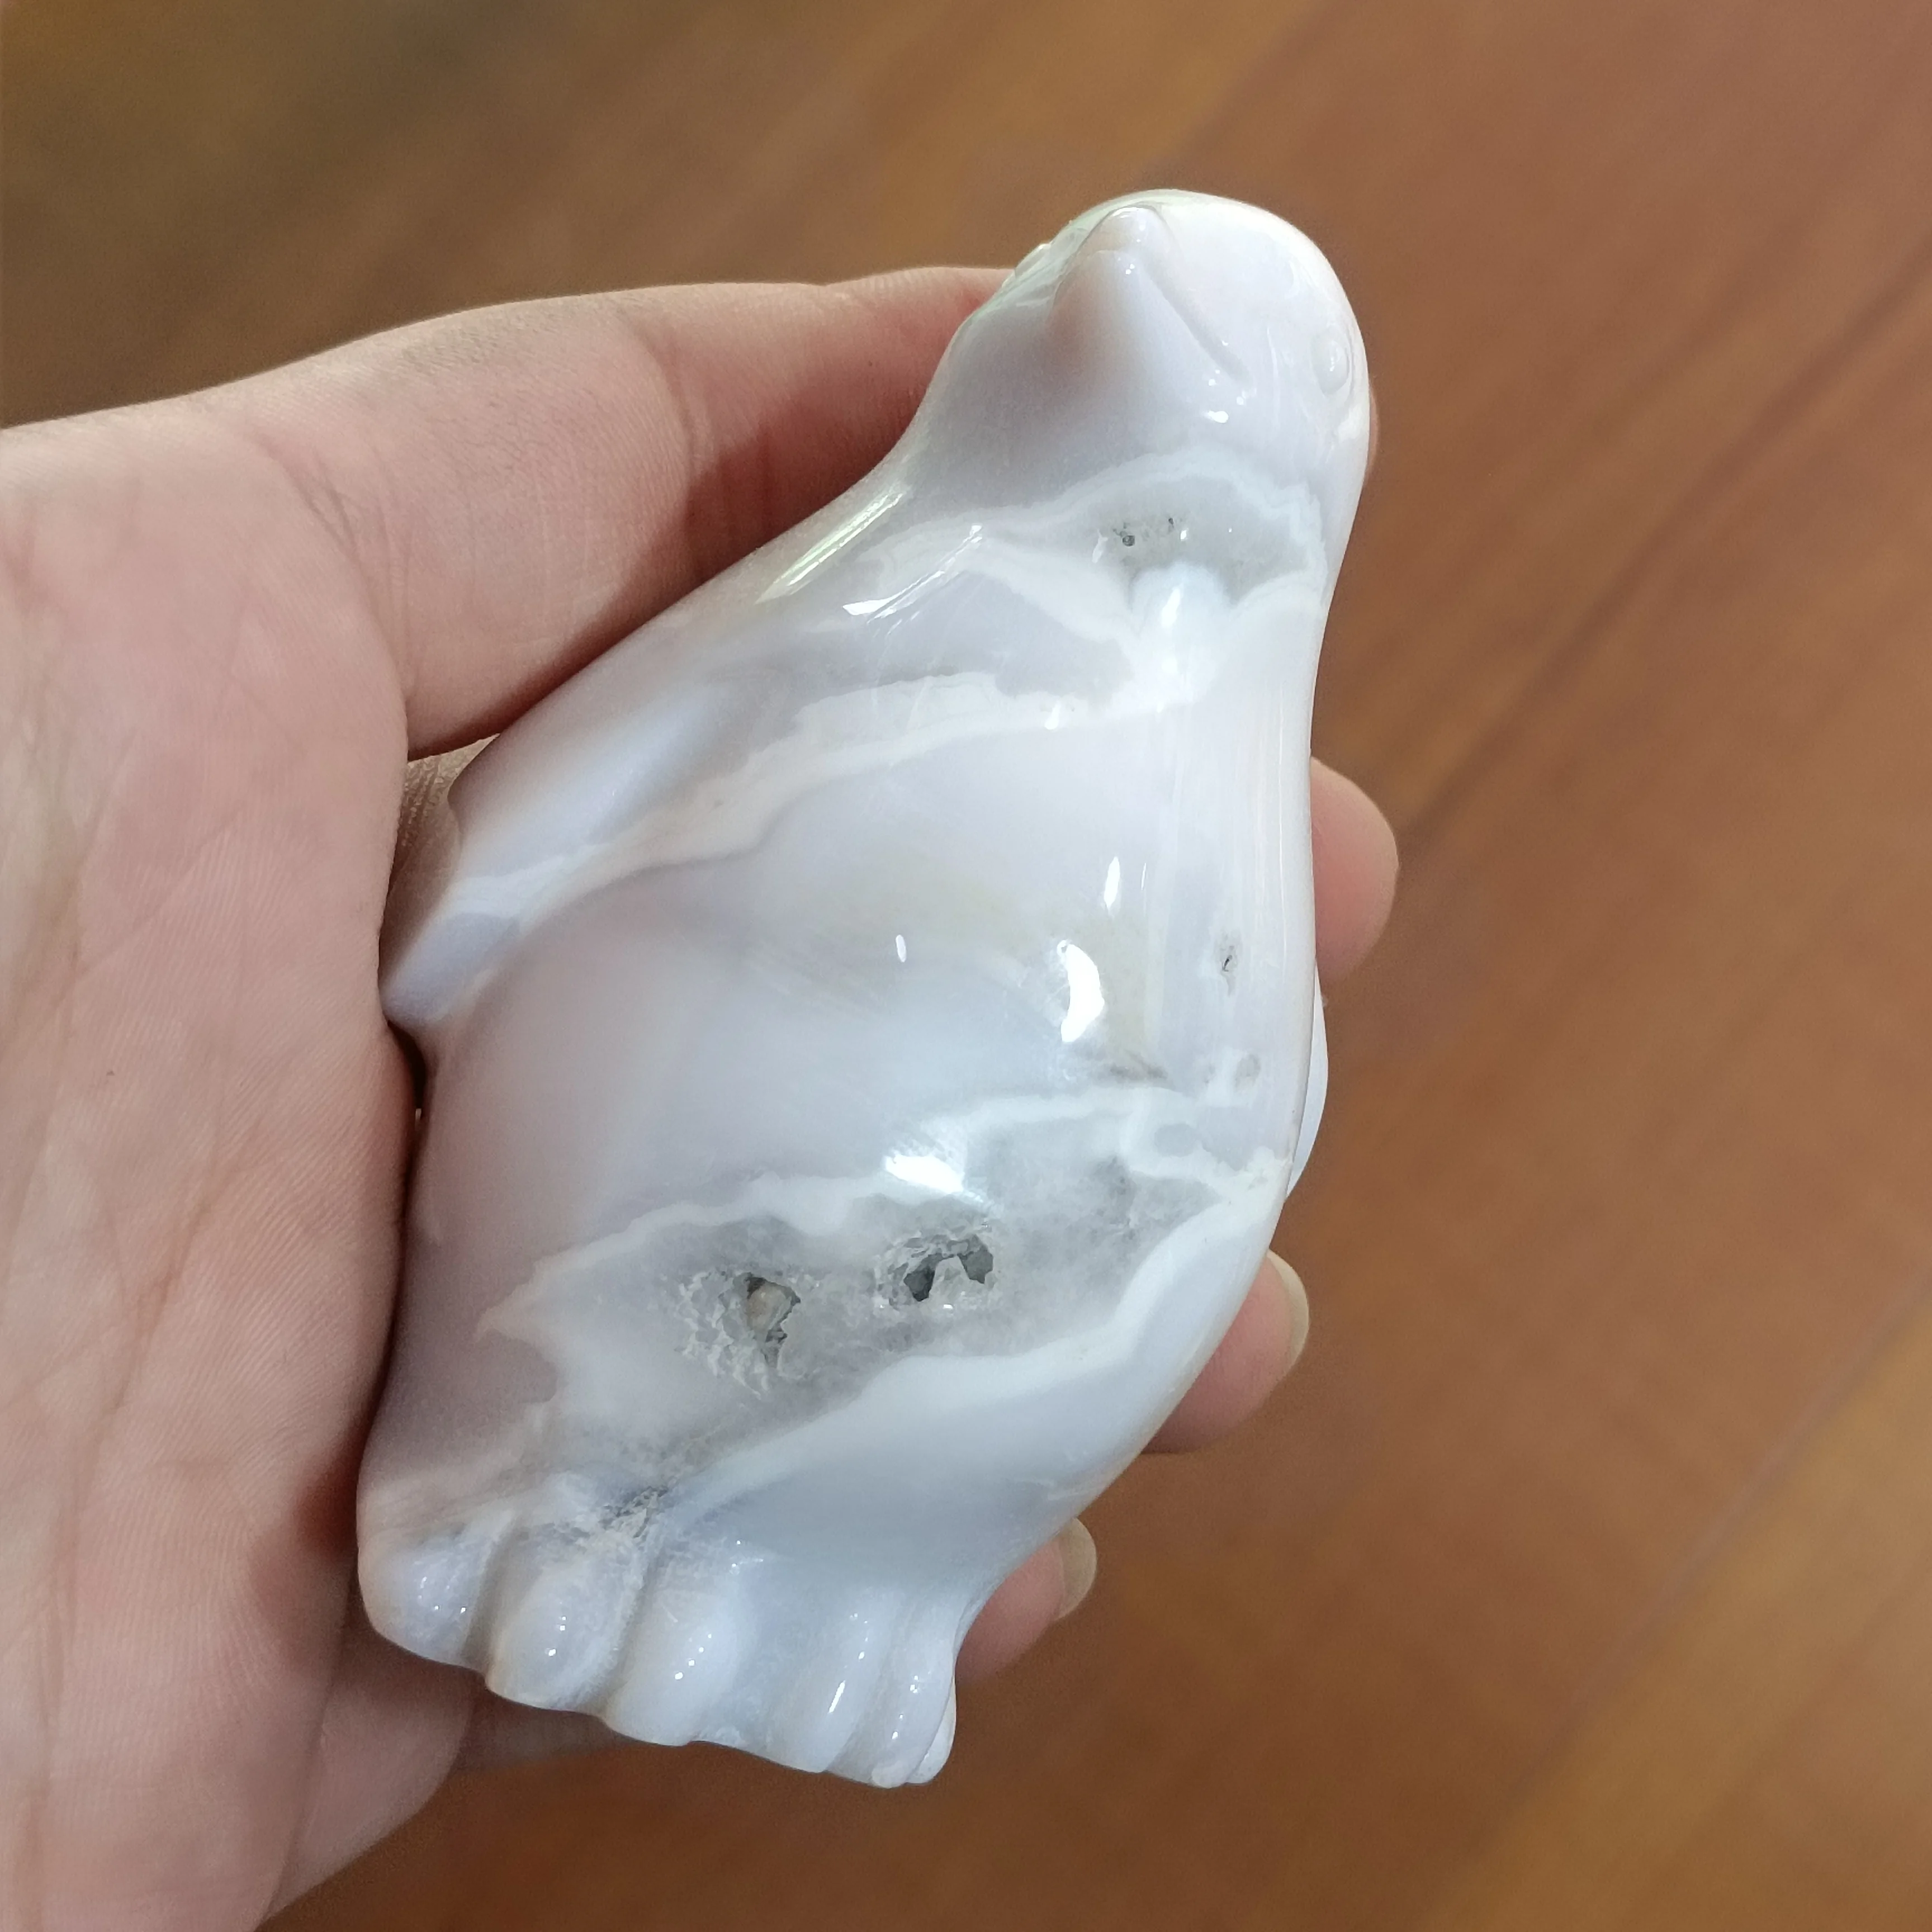 

7-8cm 1pc Natural White Agate Crystals Carving Penguin Stone Quartz Geode Animal Reiki Healing Figurine Crafts Toy Gift Decor